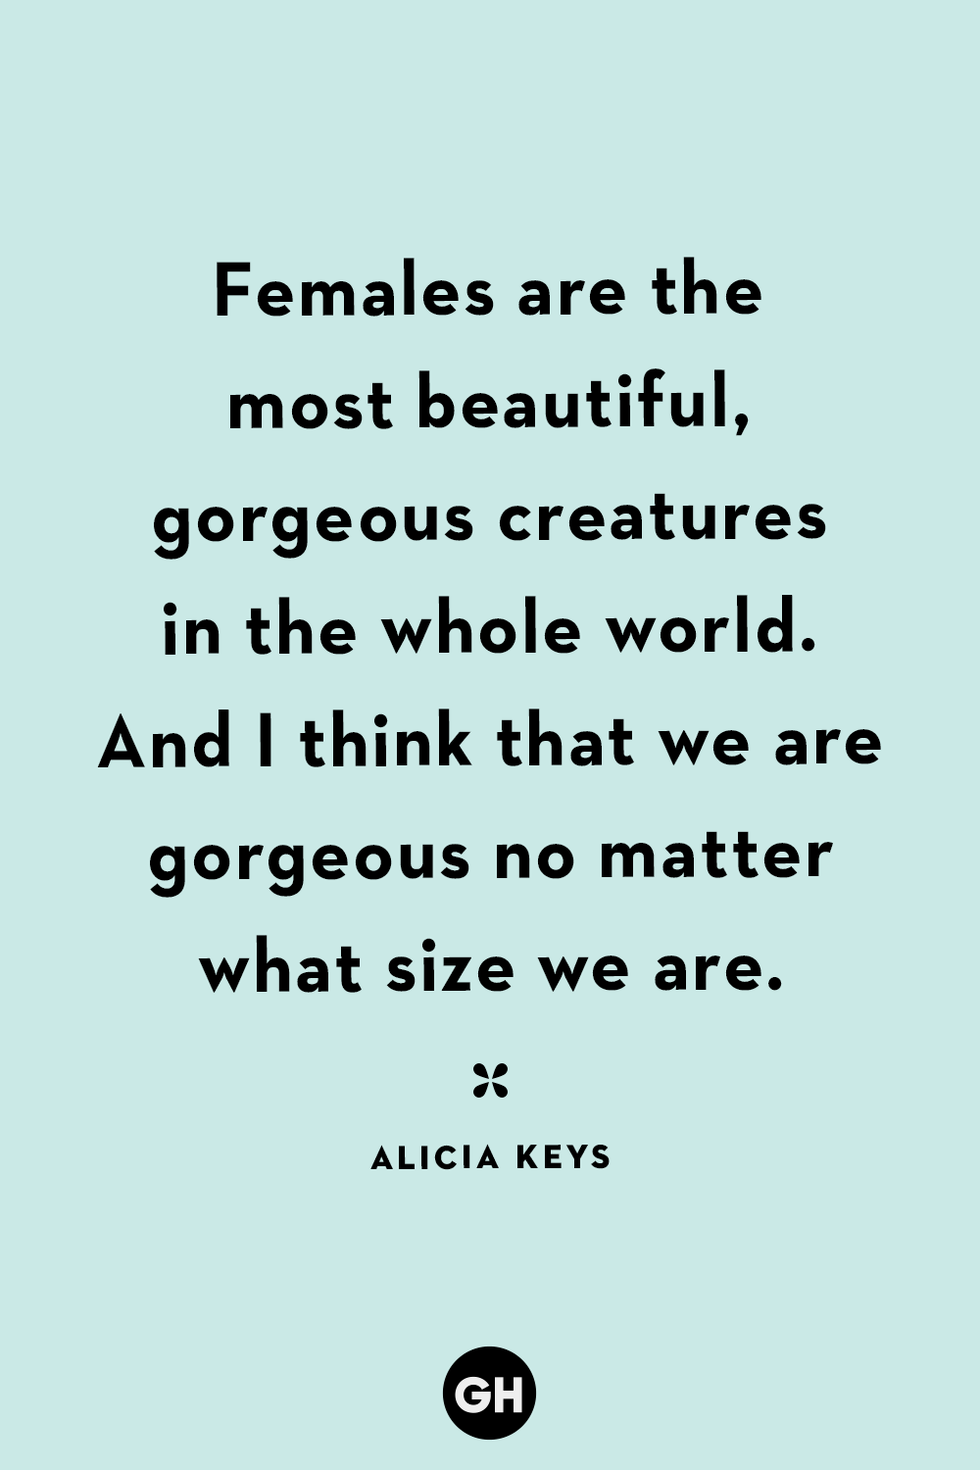 50 Profound Makeup Quotes Every Makeup Junkie Will Relate To